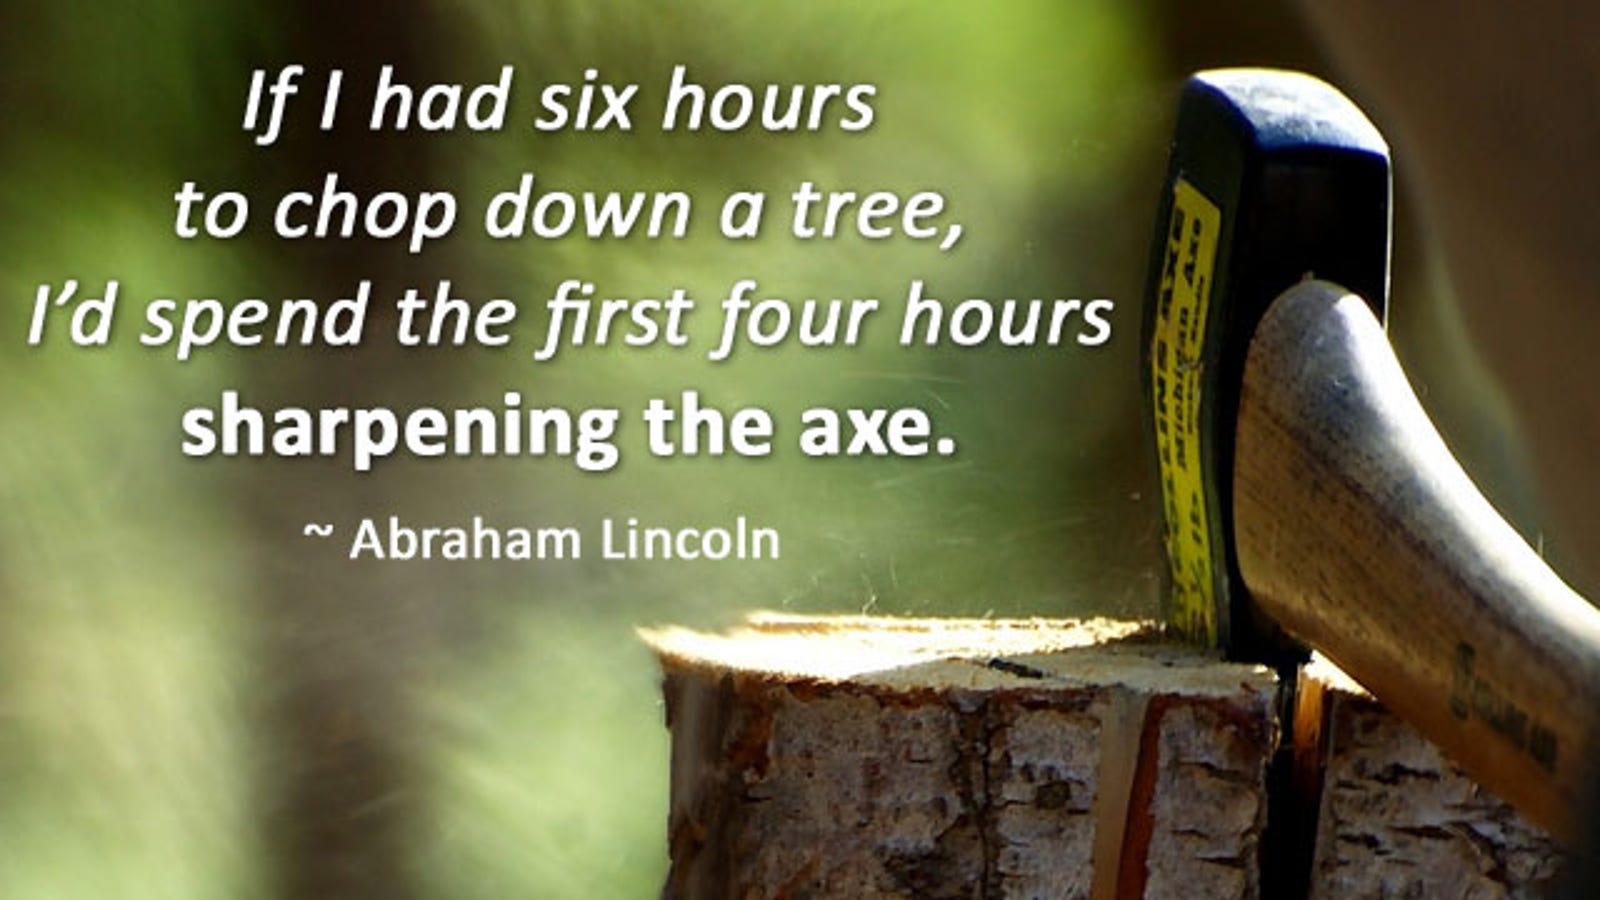 Work Smarter and More Easily by "Sharpening Your Axe"